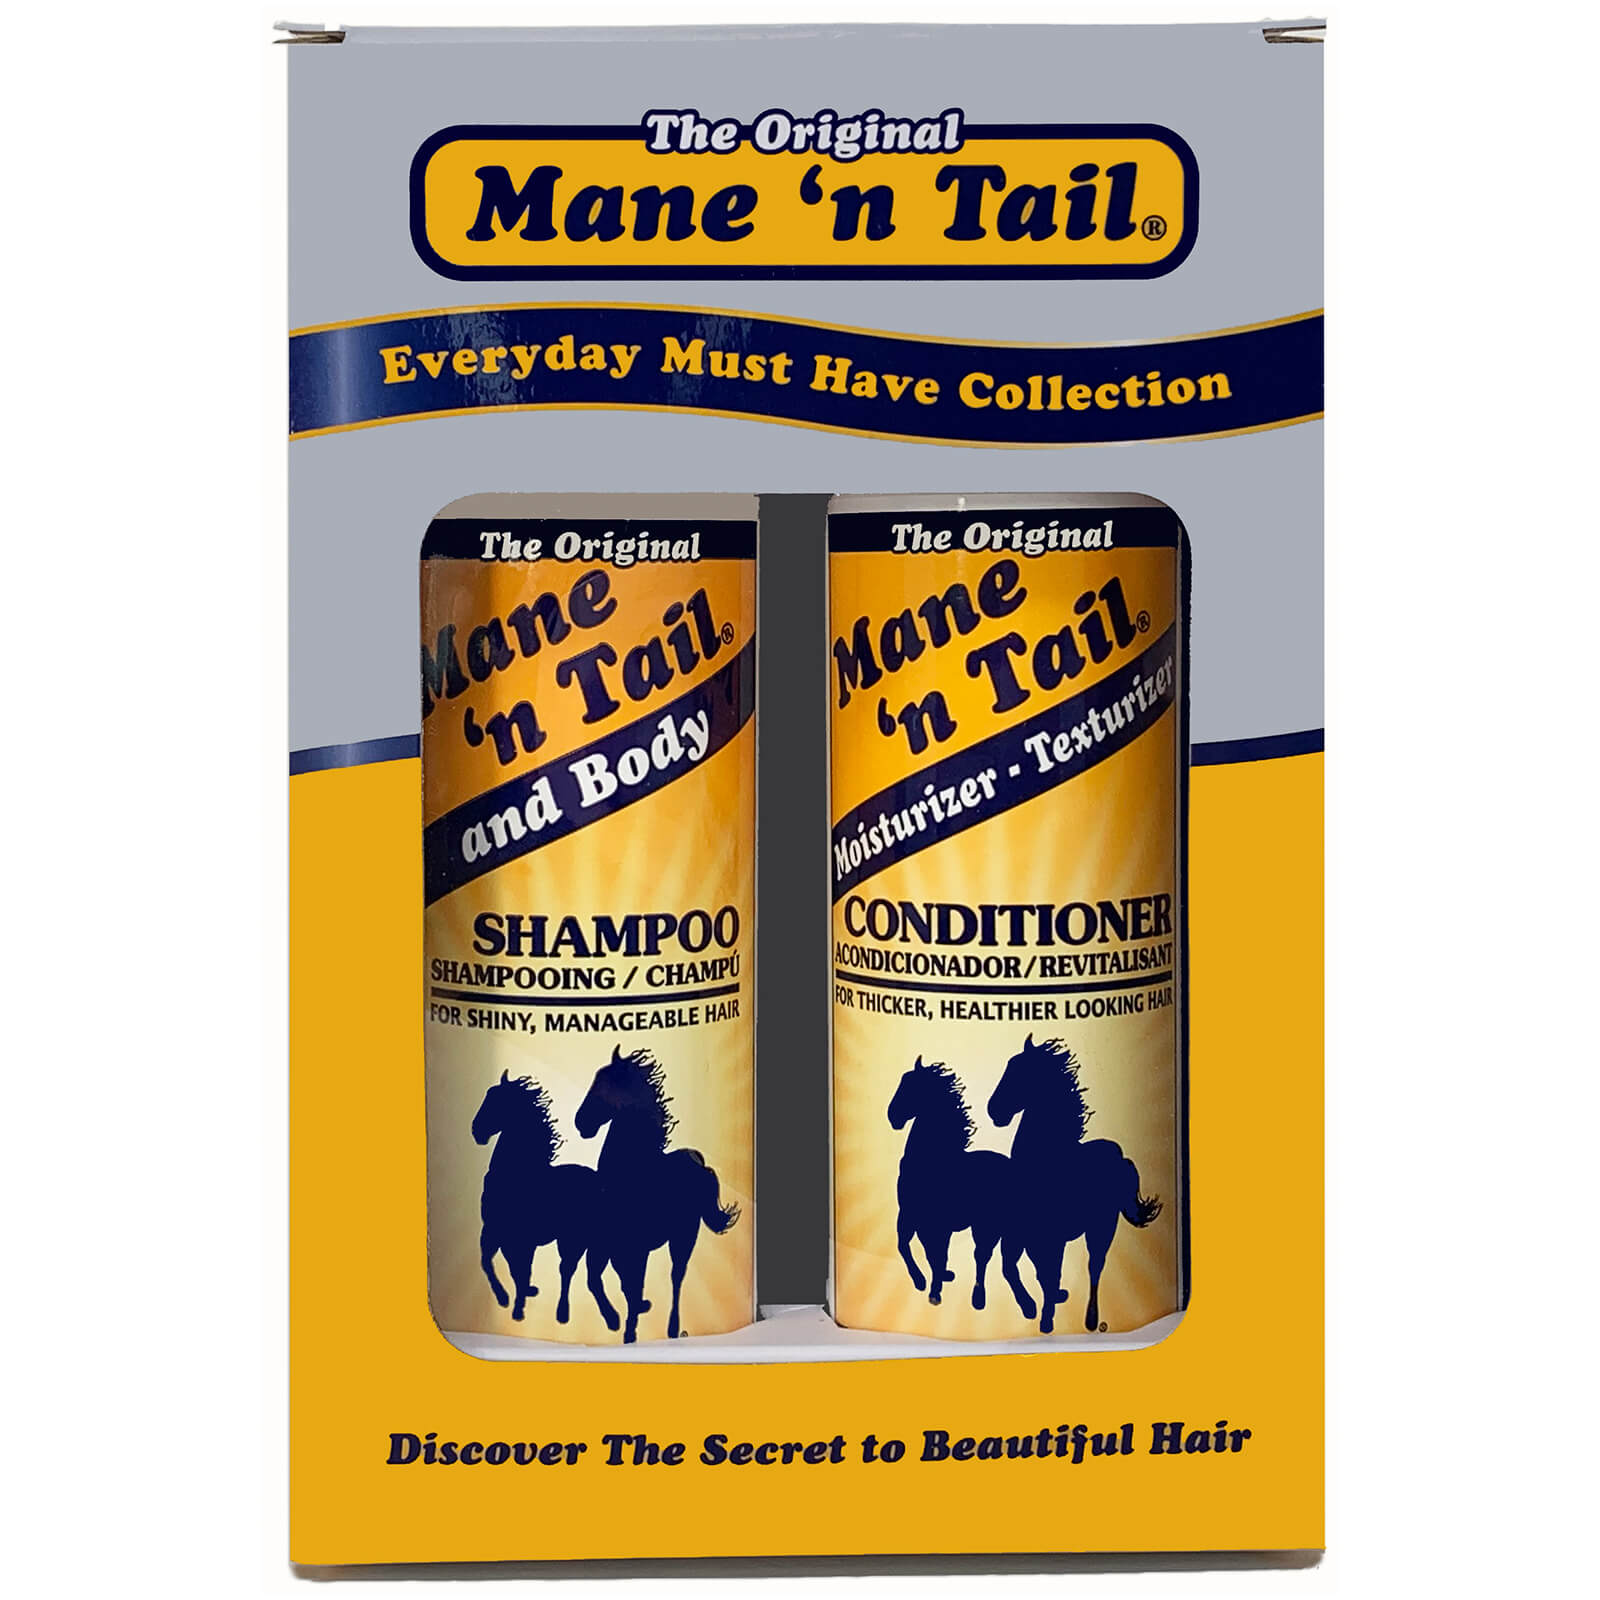 Mane 'n Tail Everyday Must Have Collection - Original